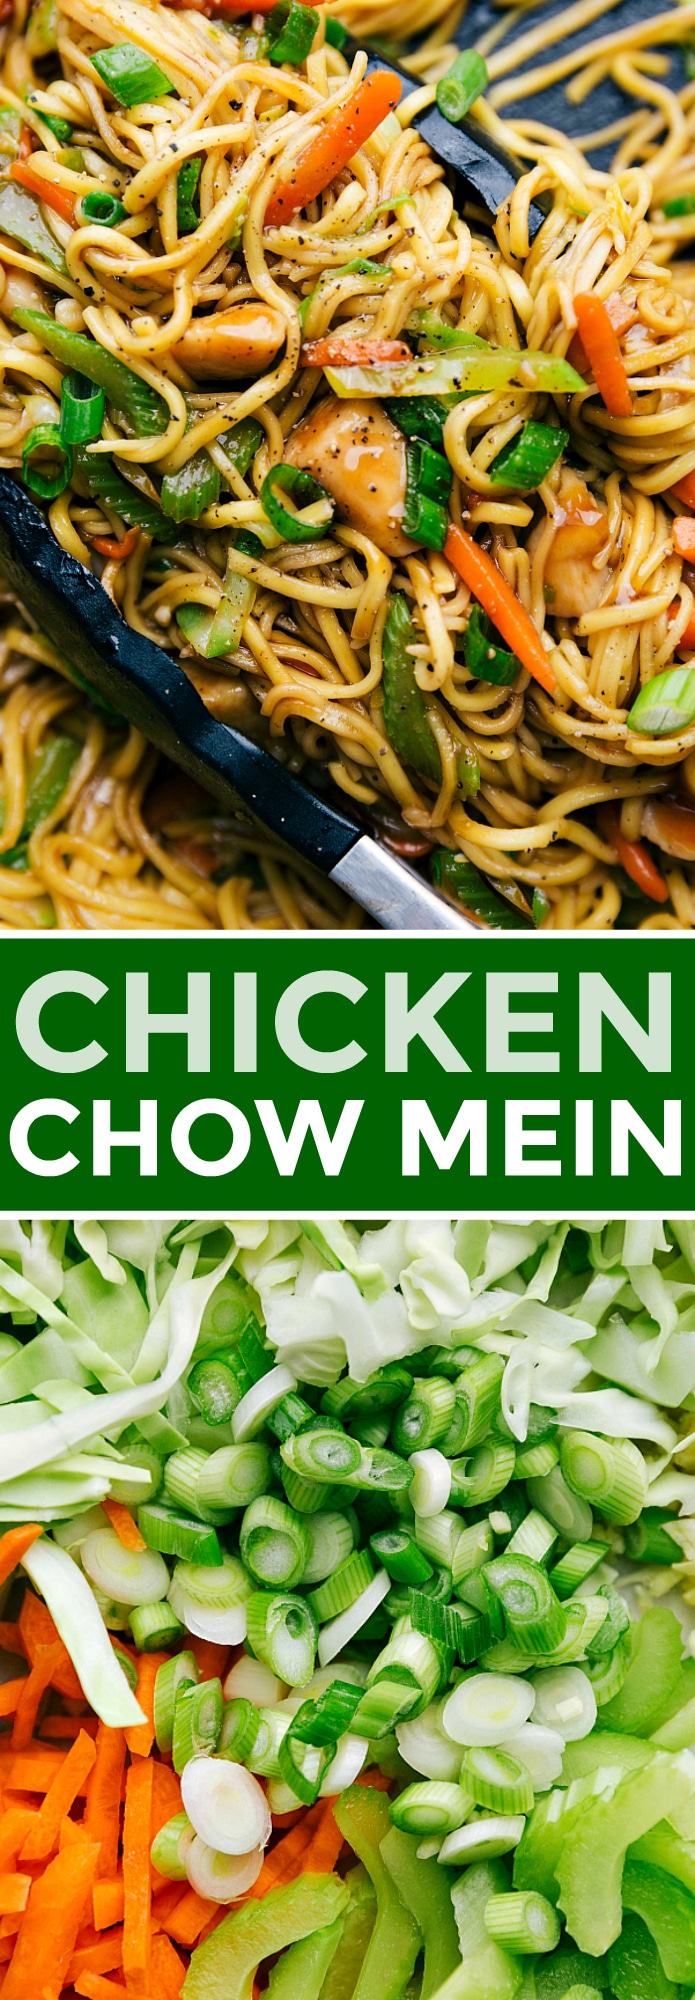 Easy 30-minute chicken chow mein with tender chicken bites, plenty of veggies, and an addictive savory sauce coating it all. Today I'm sharing all my tips and tricks for how to make chicken chow mein BETTER than takeout! This is sure to be a hit! Recipe via chelseasmessyapron #eay #chinese #best #withcabbage